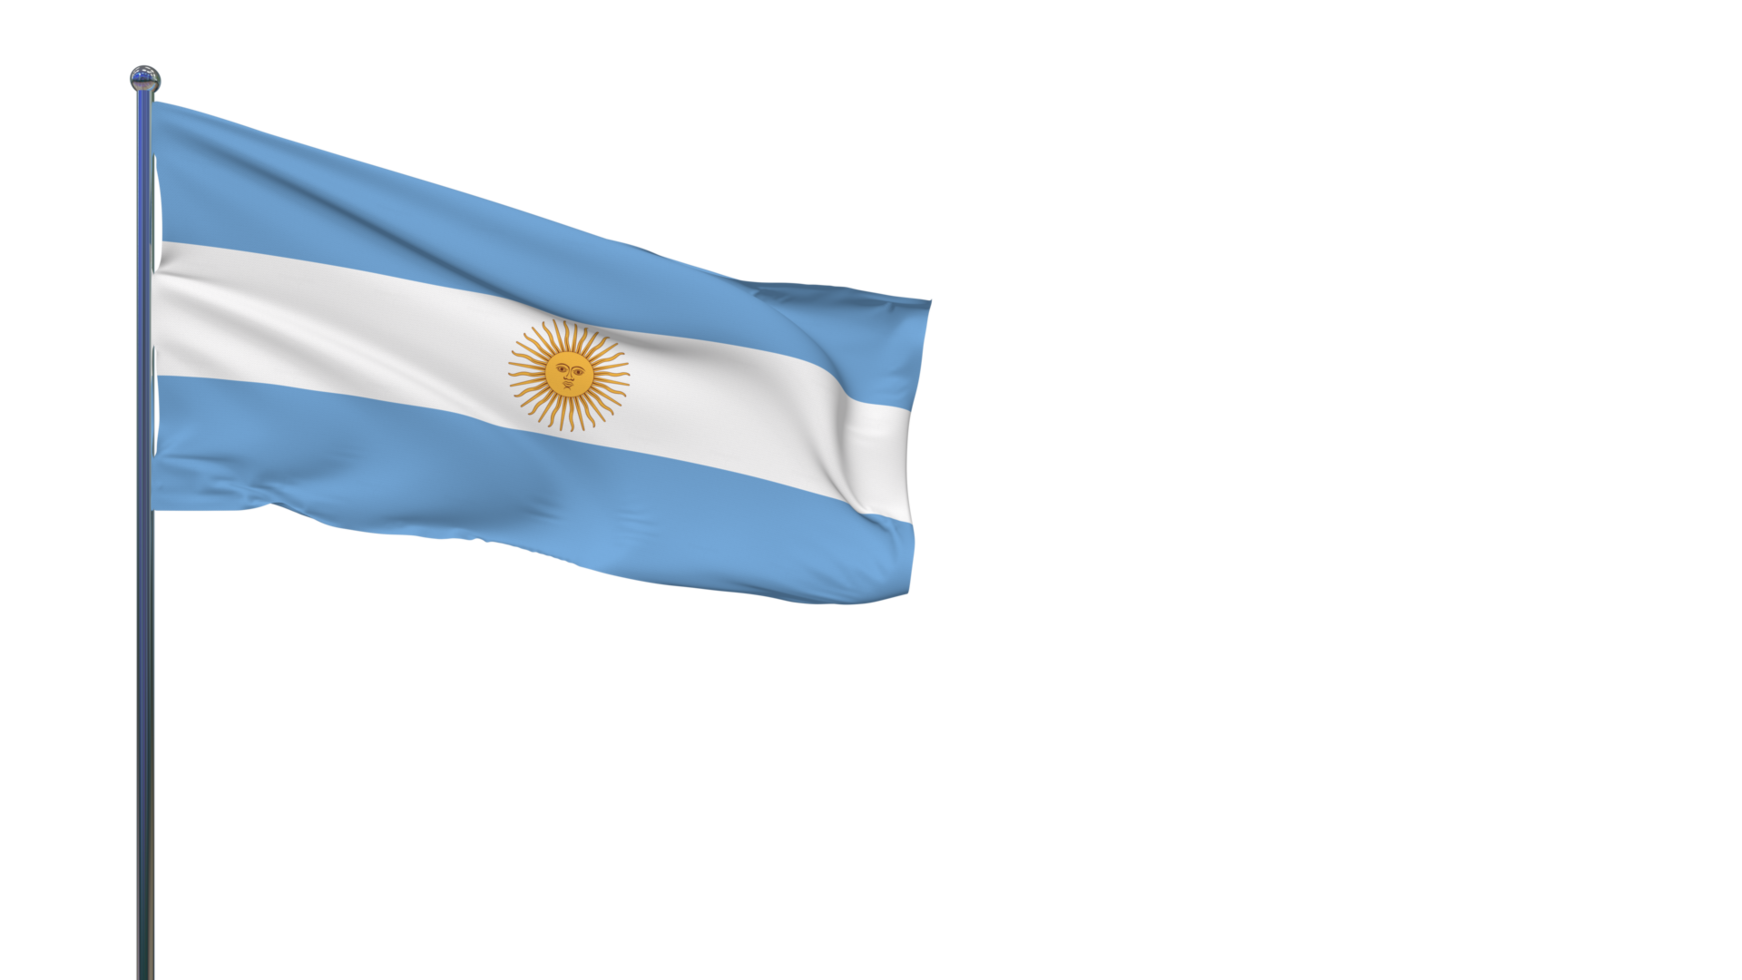 Argentina Flag Waving in The Wind 3D Rendering, National Day, Independence Day png